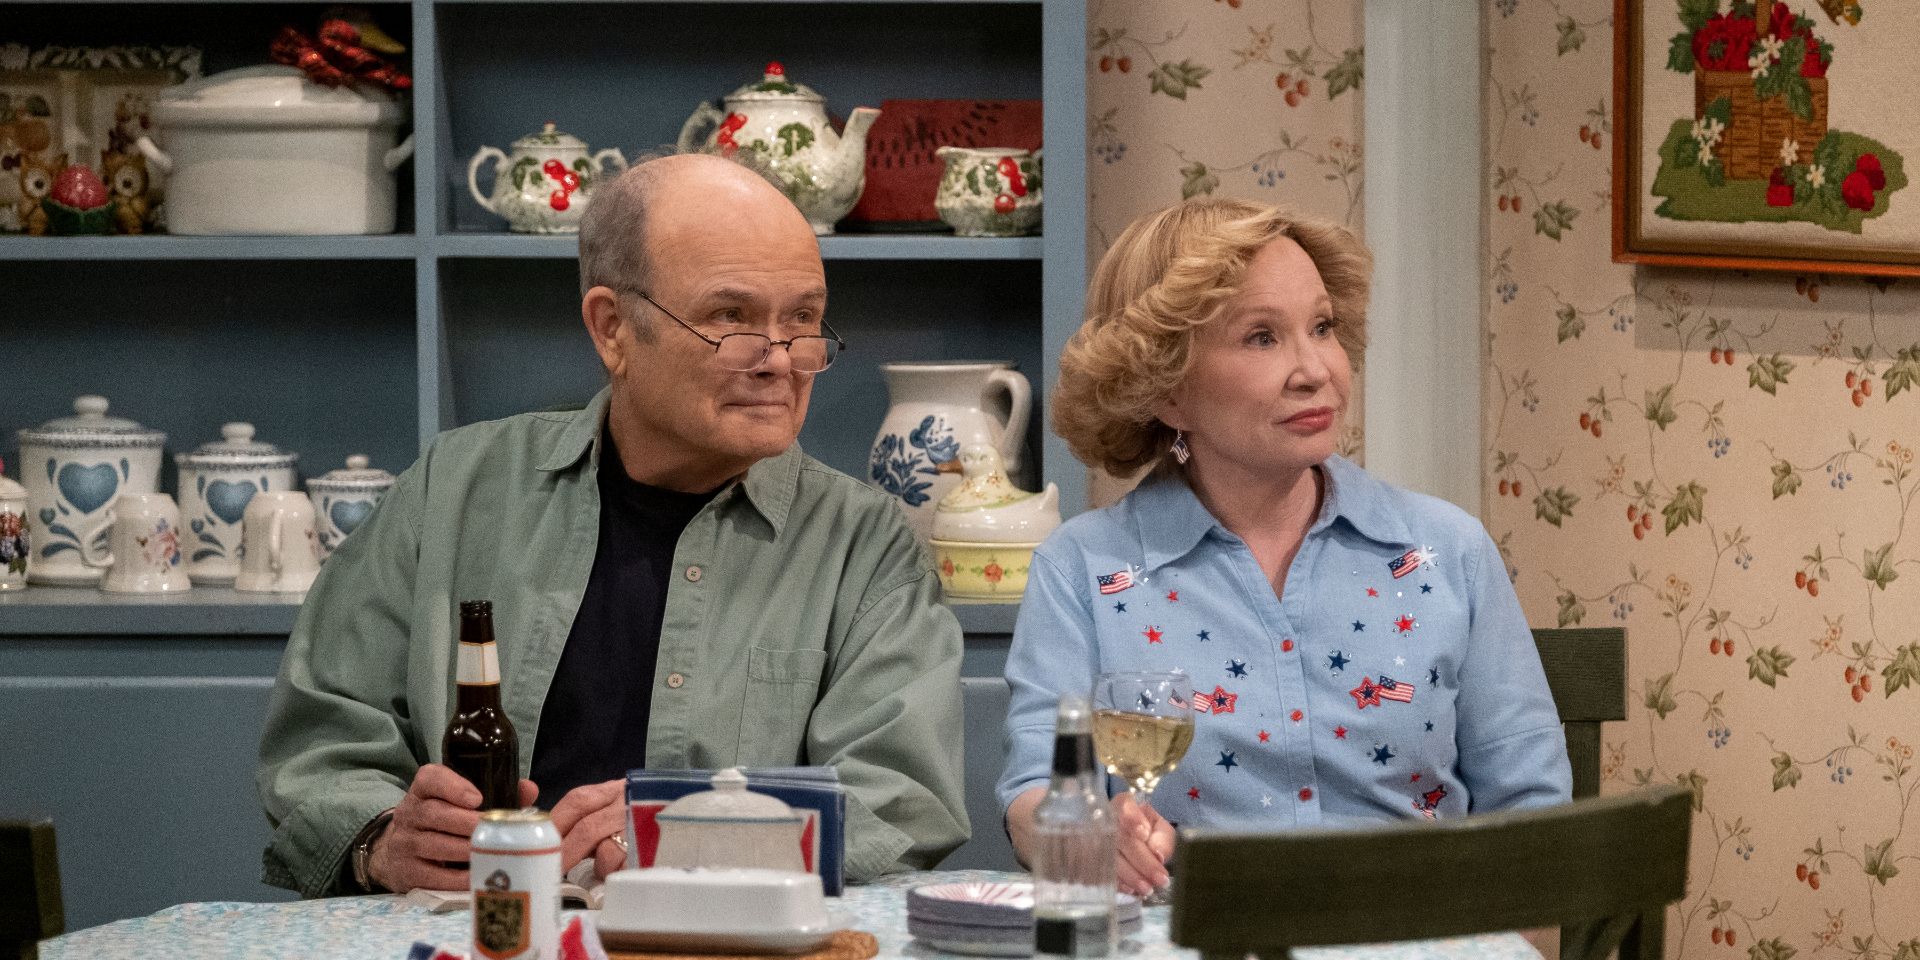 Kurtwood Smith and Debra Jo Rupp in That 90s Show promo images